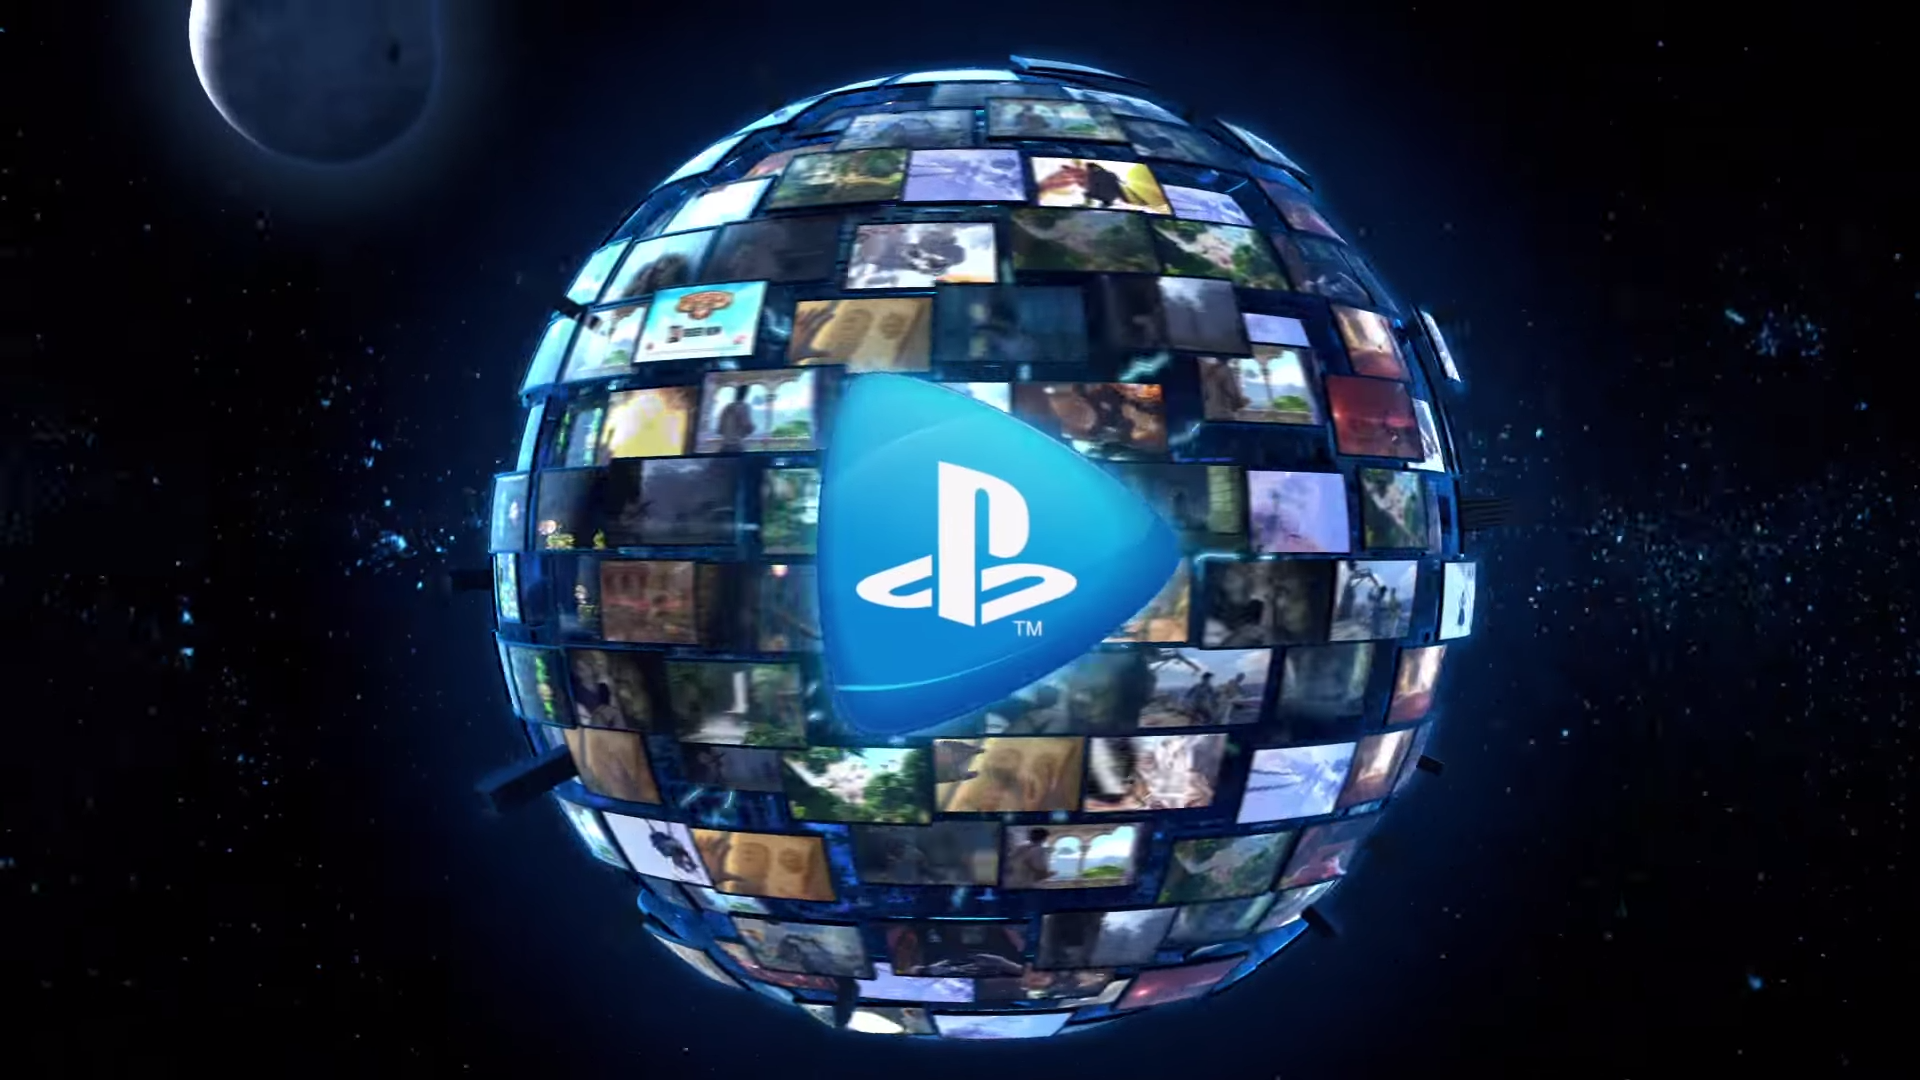 playstation now trial